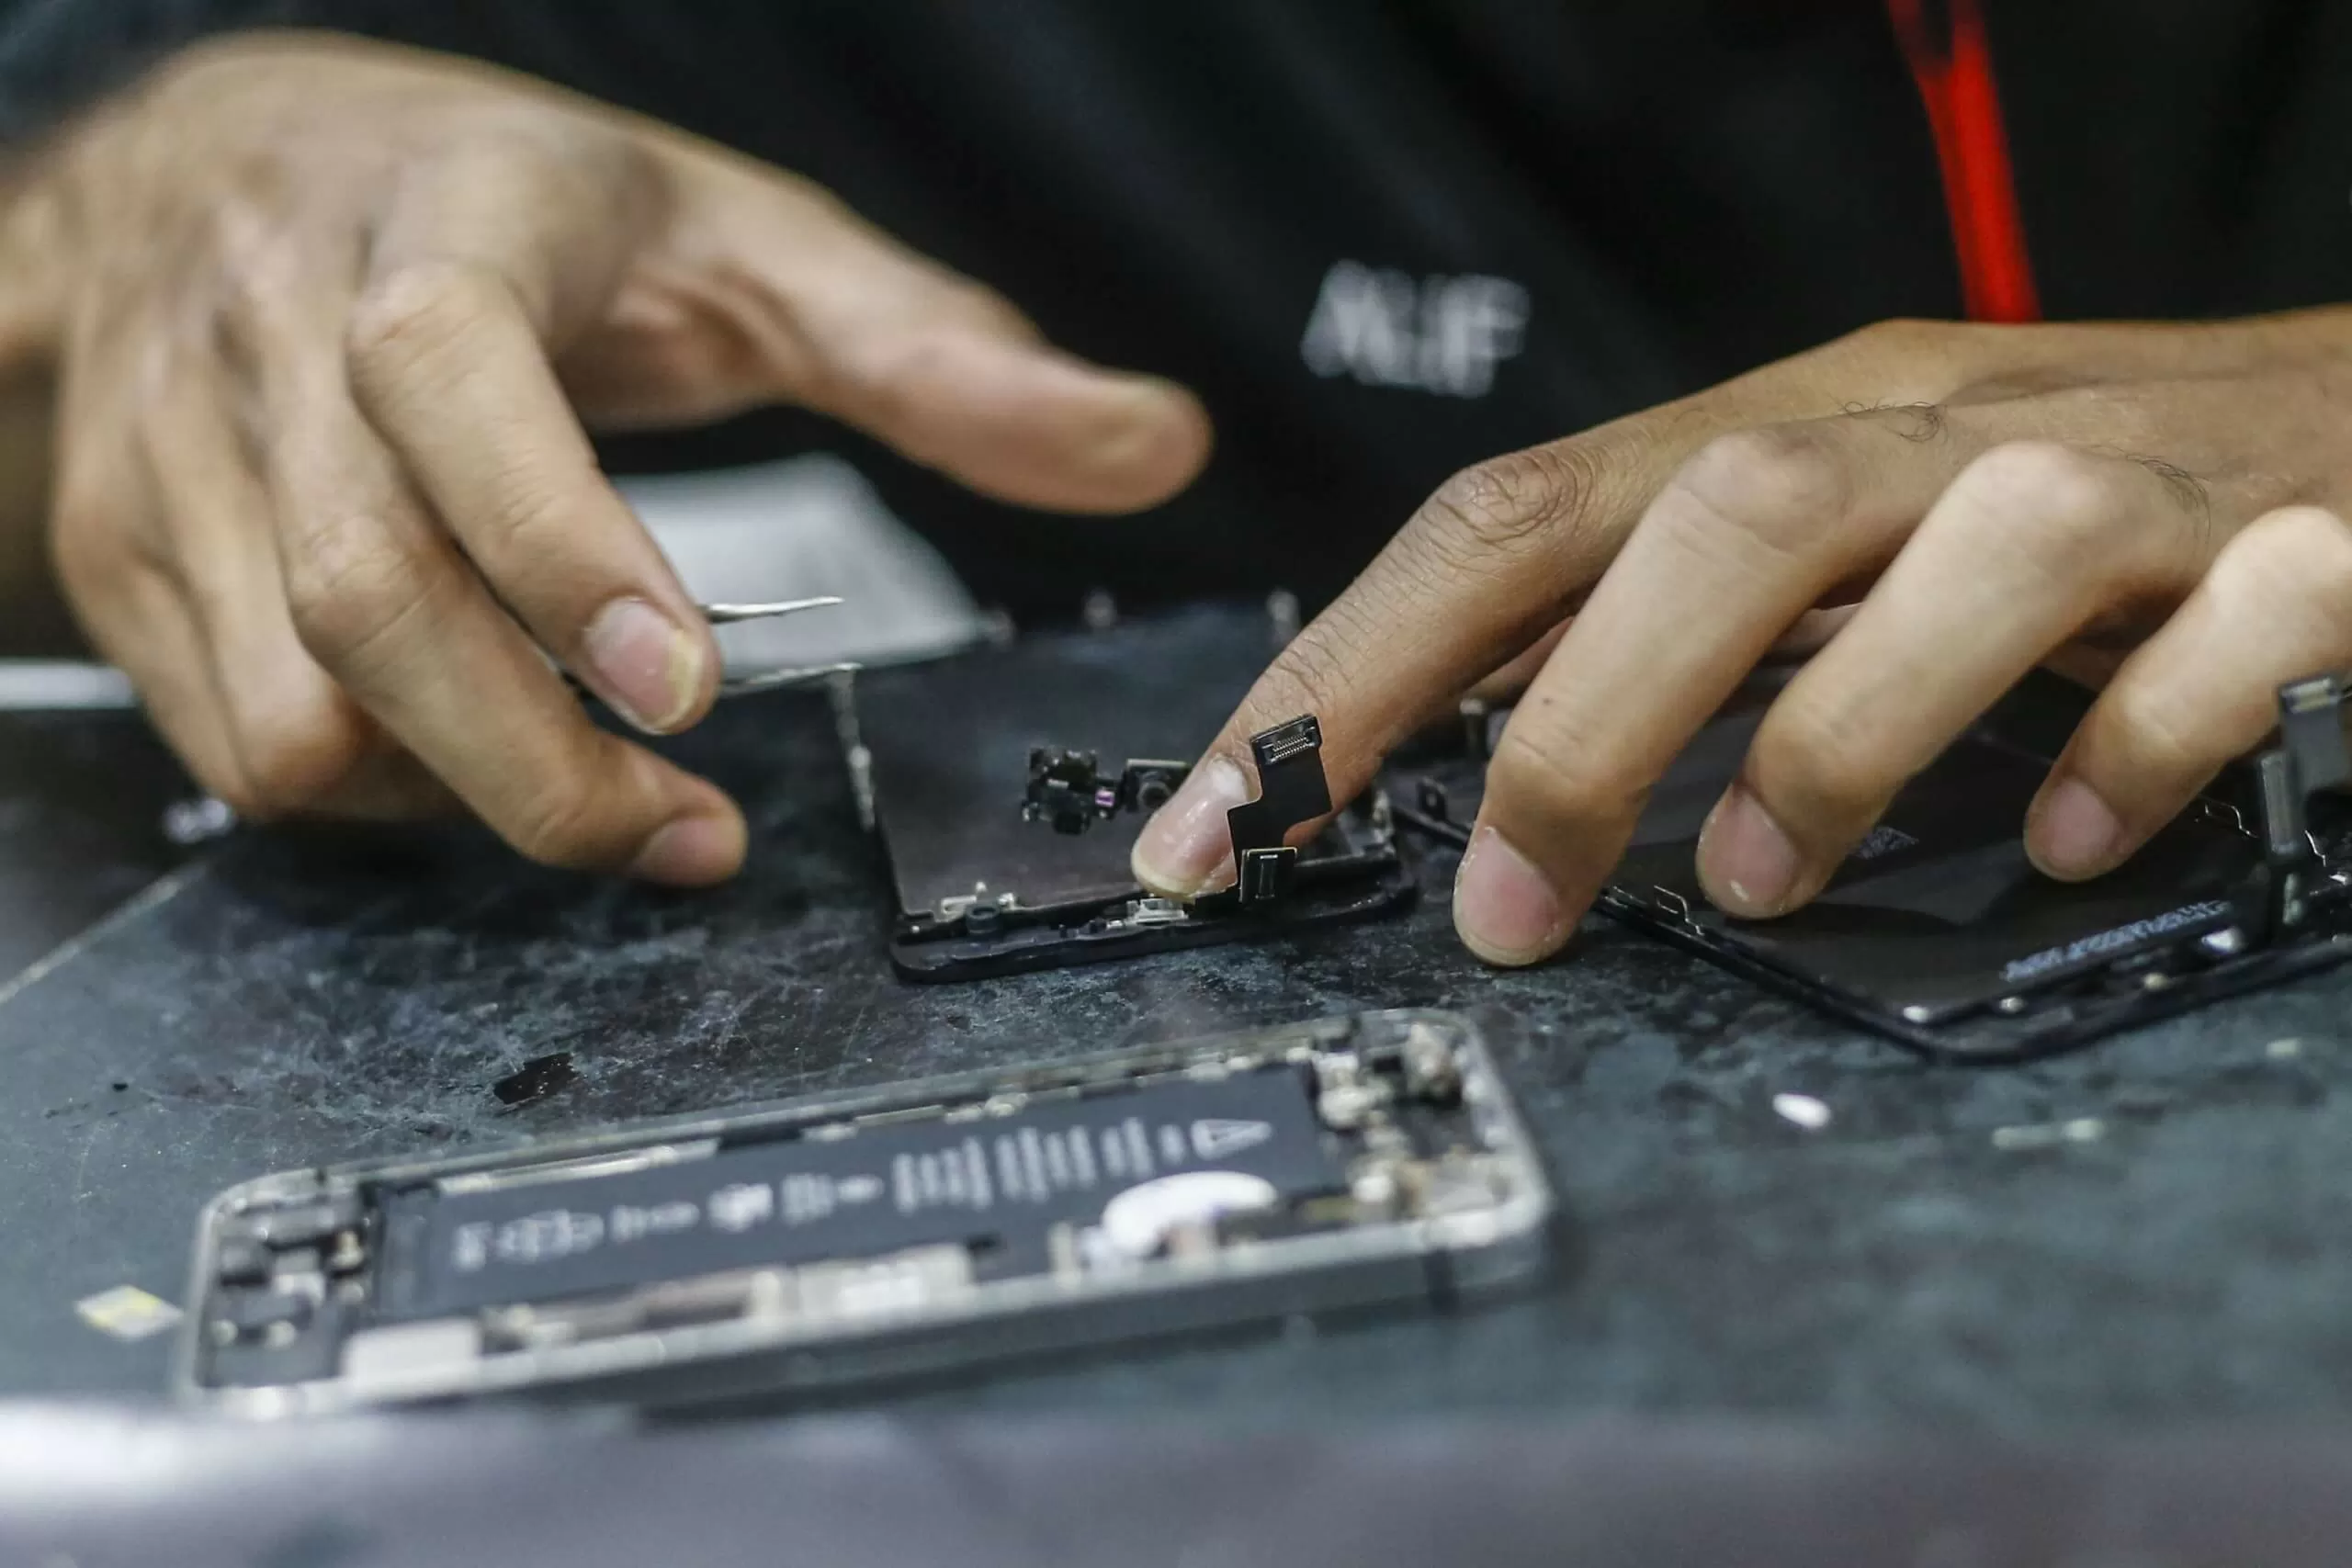 Study shows 50% of repair shops snooped on customer devices